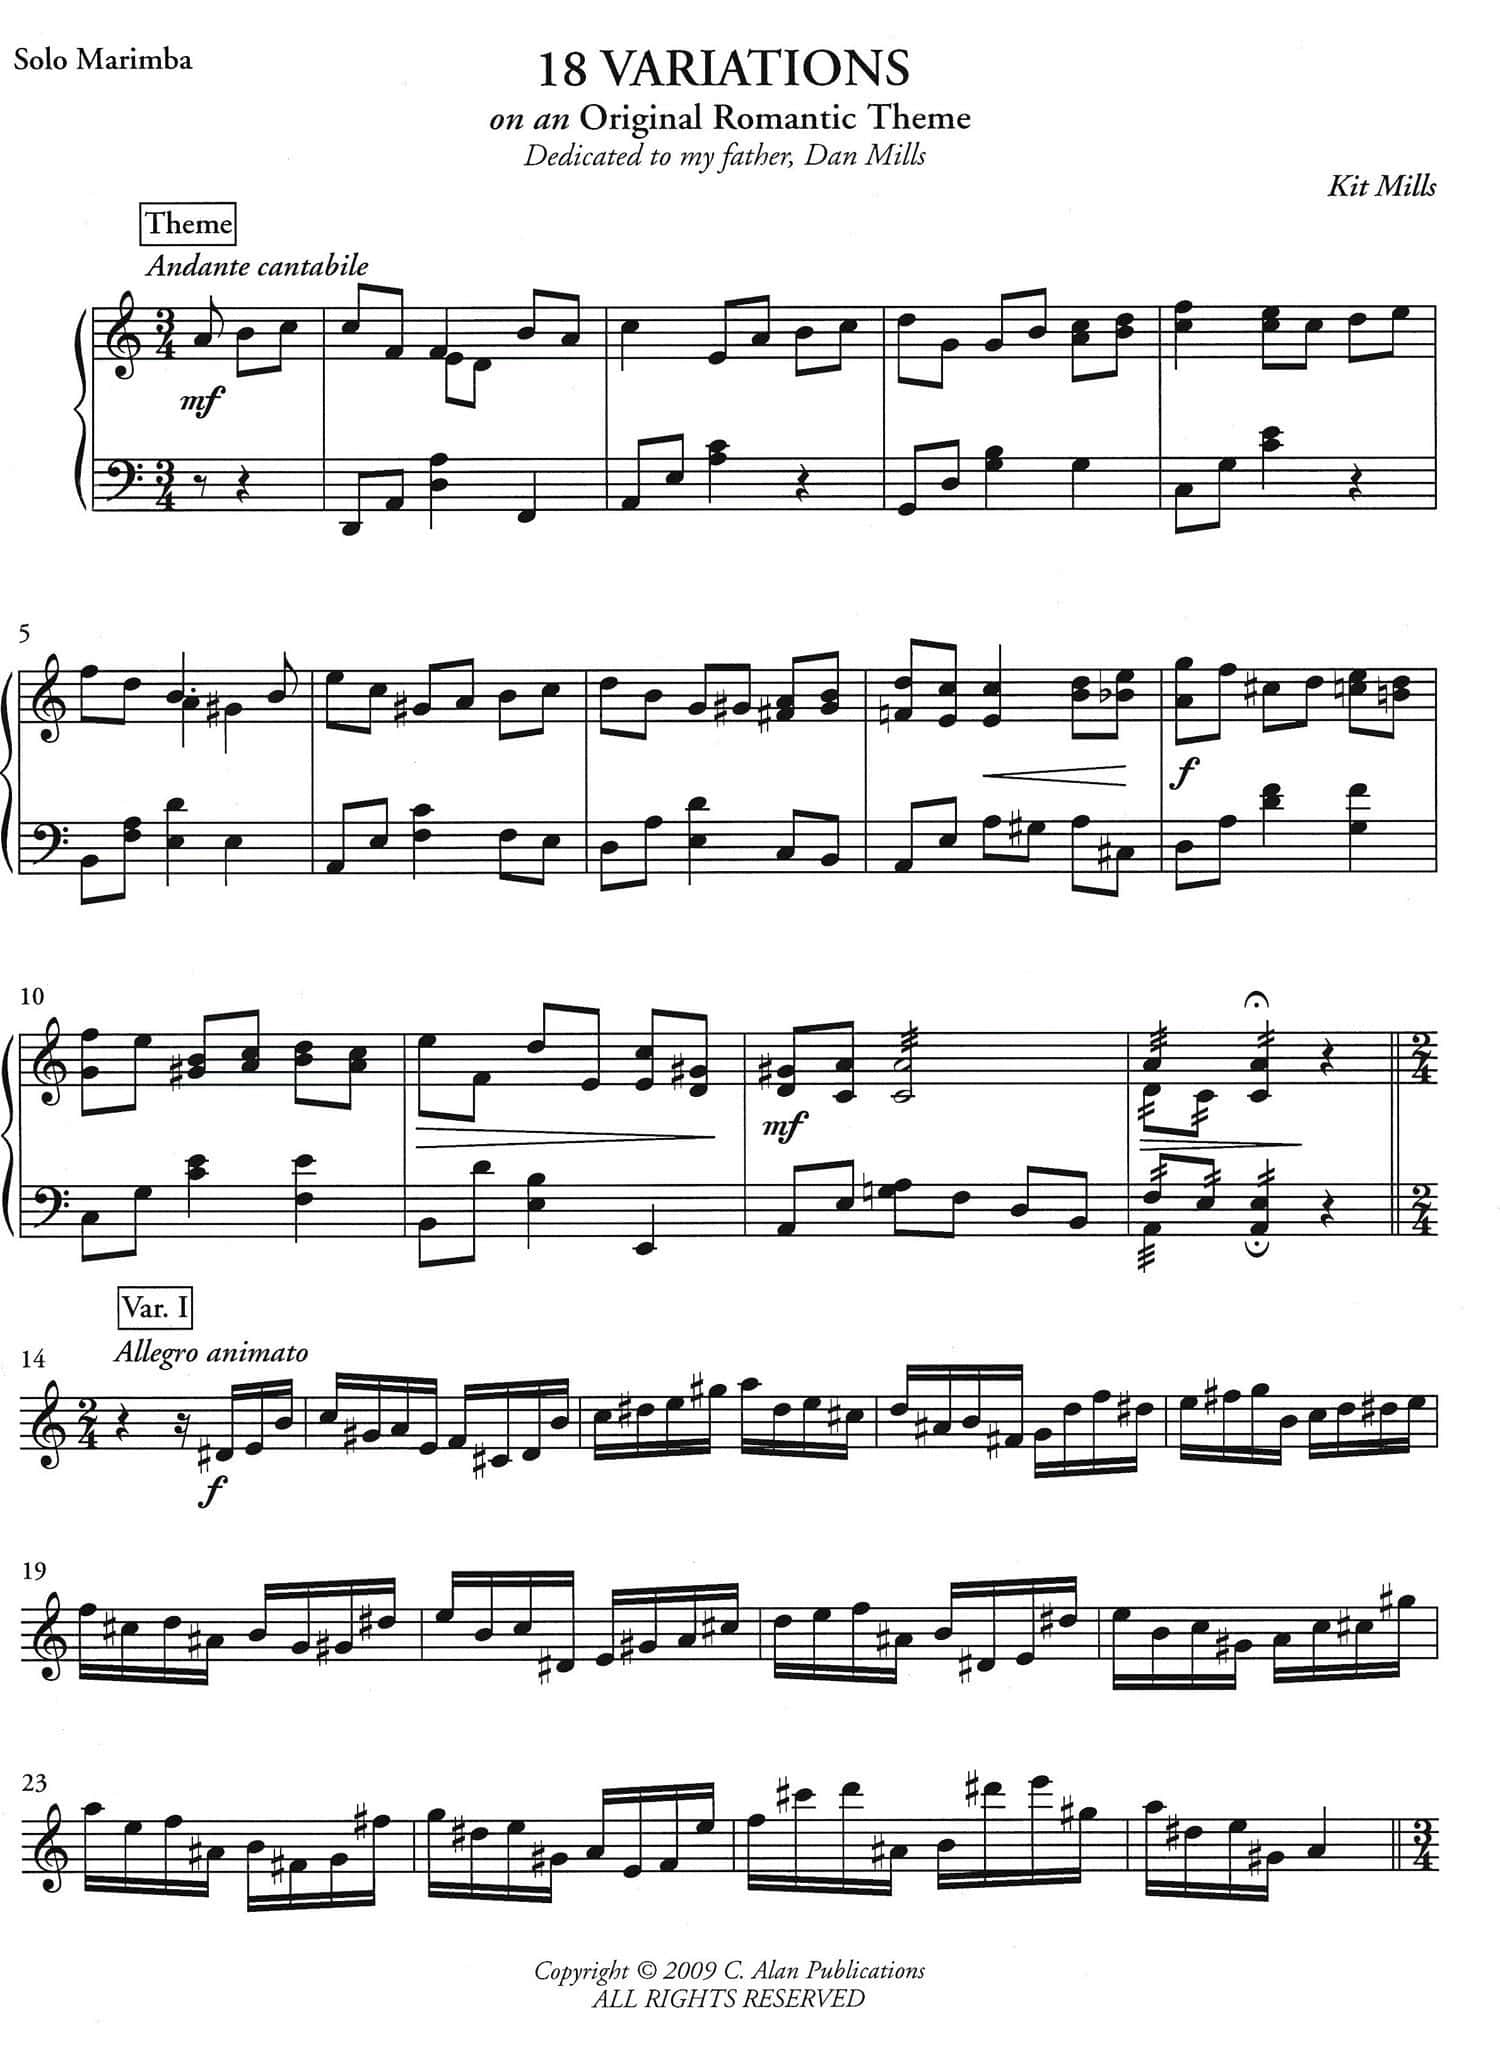 18 Variations on an Original Romantic Theme by Kit Mills